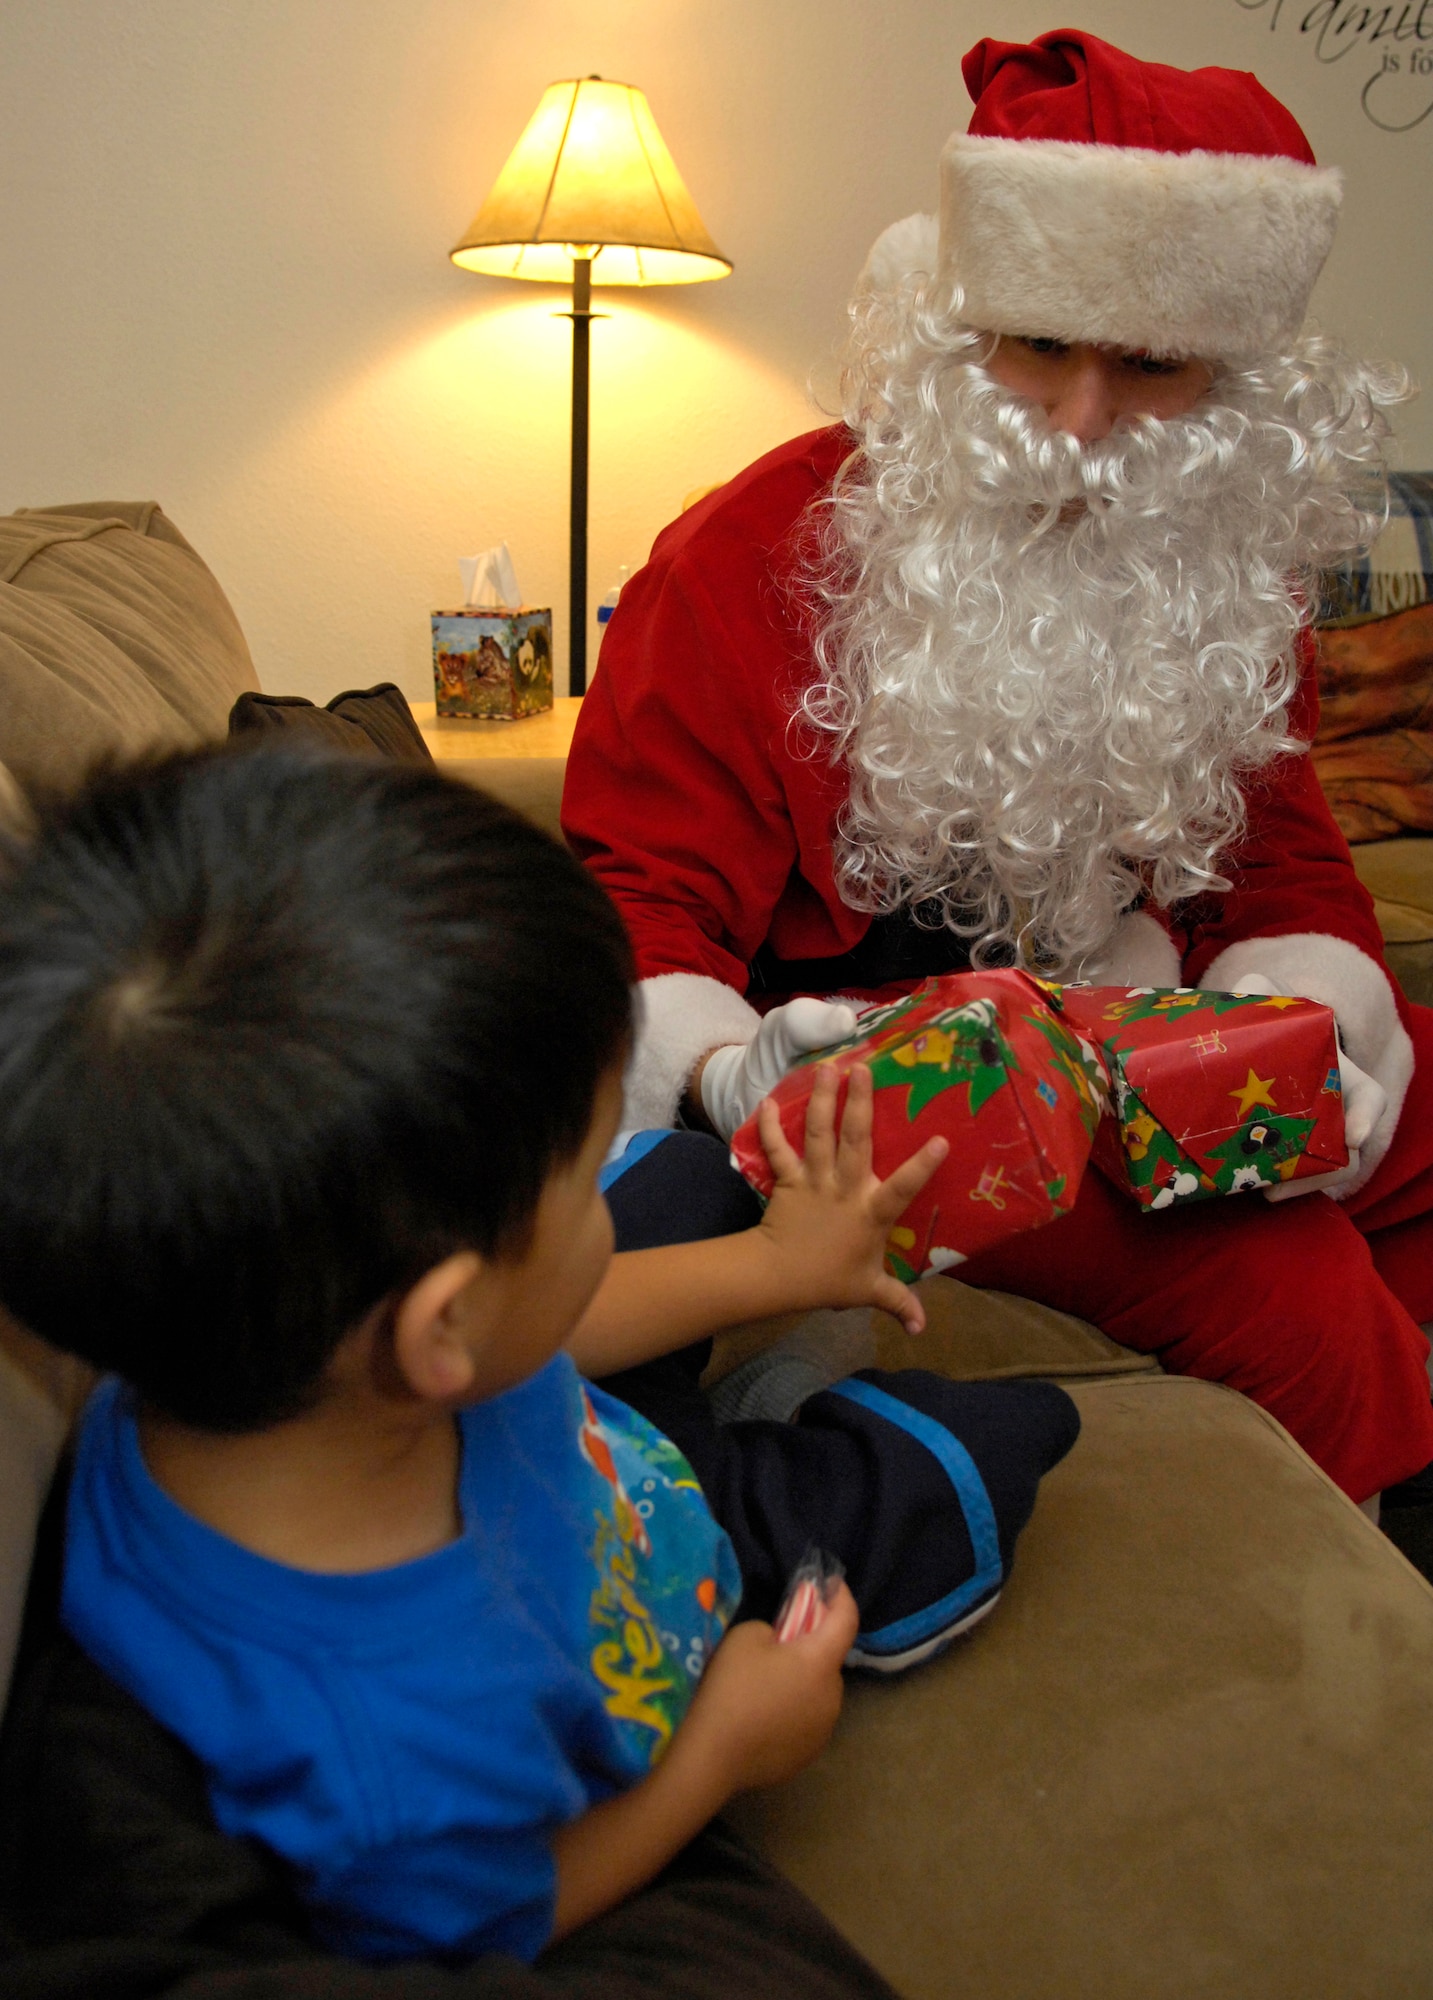 VANDENBERG AIR FORCE BASE, Calif. --  Starting off Christmas early, Santa hands Tristan Anzara, son of Tech Sgt. Nancy Anzara, from the 533rd Training Squadron, an early Christmas present to open here Wednesday, Dec. 15, 2009. The Santa visits were planned with the parents of each household to come and surprise the kids of the house with early Christmas presents provided by the parents.  (U.S. Air Force photo/Airman 1st Class Andrew Lee) 